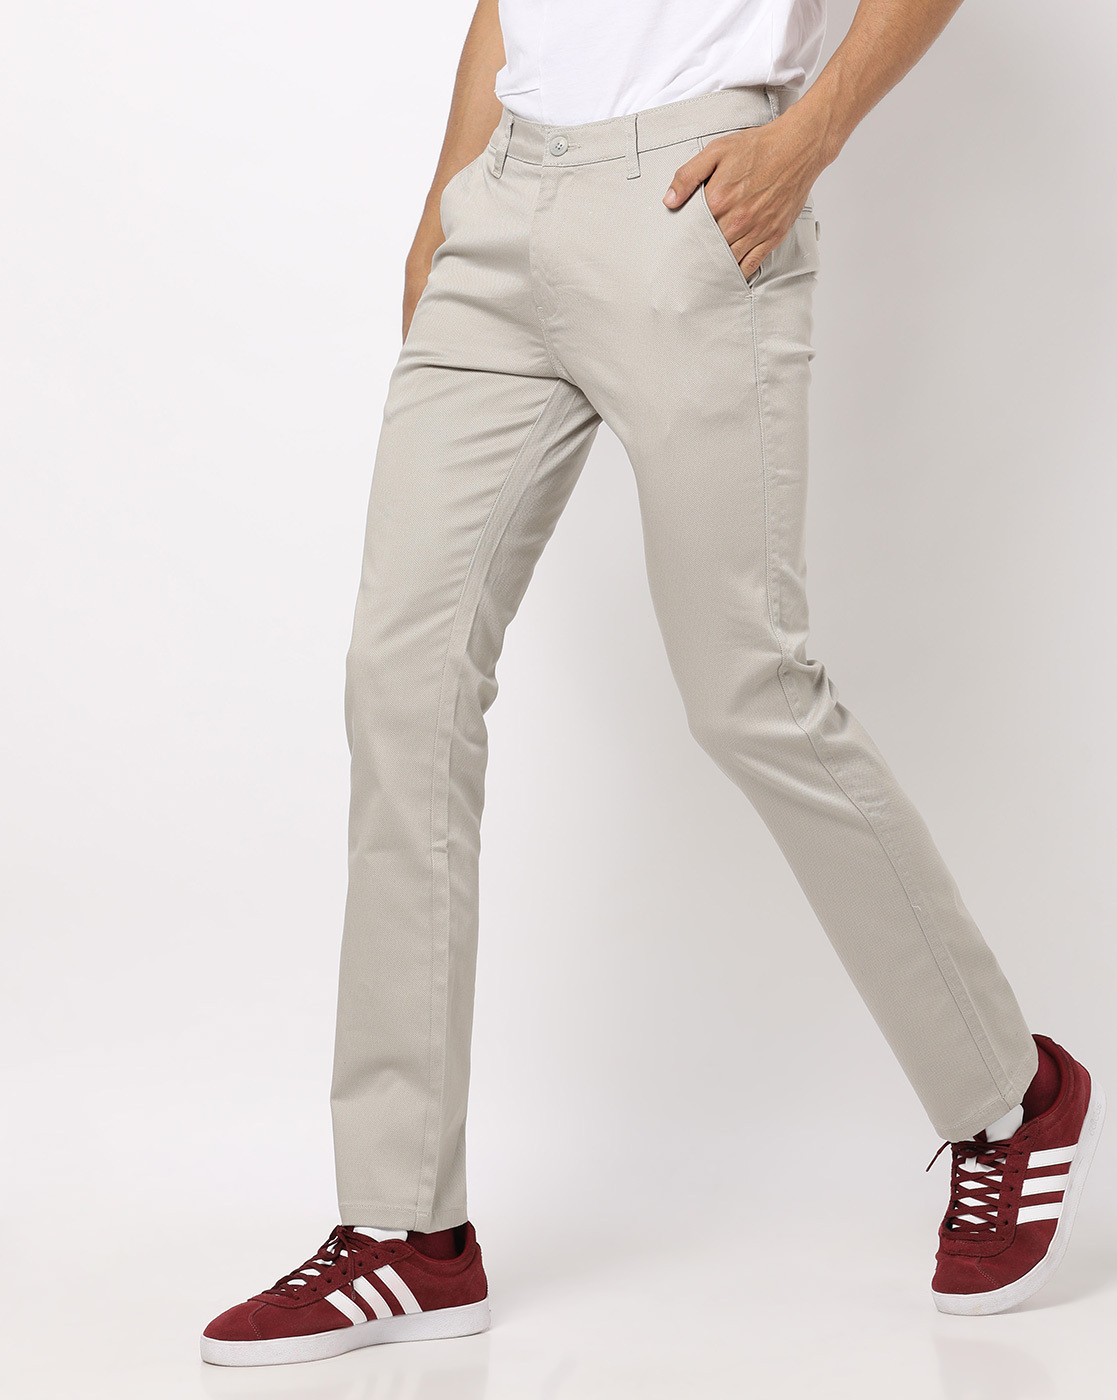 Buy Black Trousers  Pants for Men by FIRST CLASS Online  Ajiocom